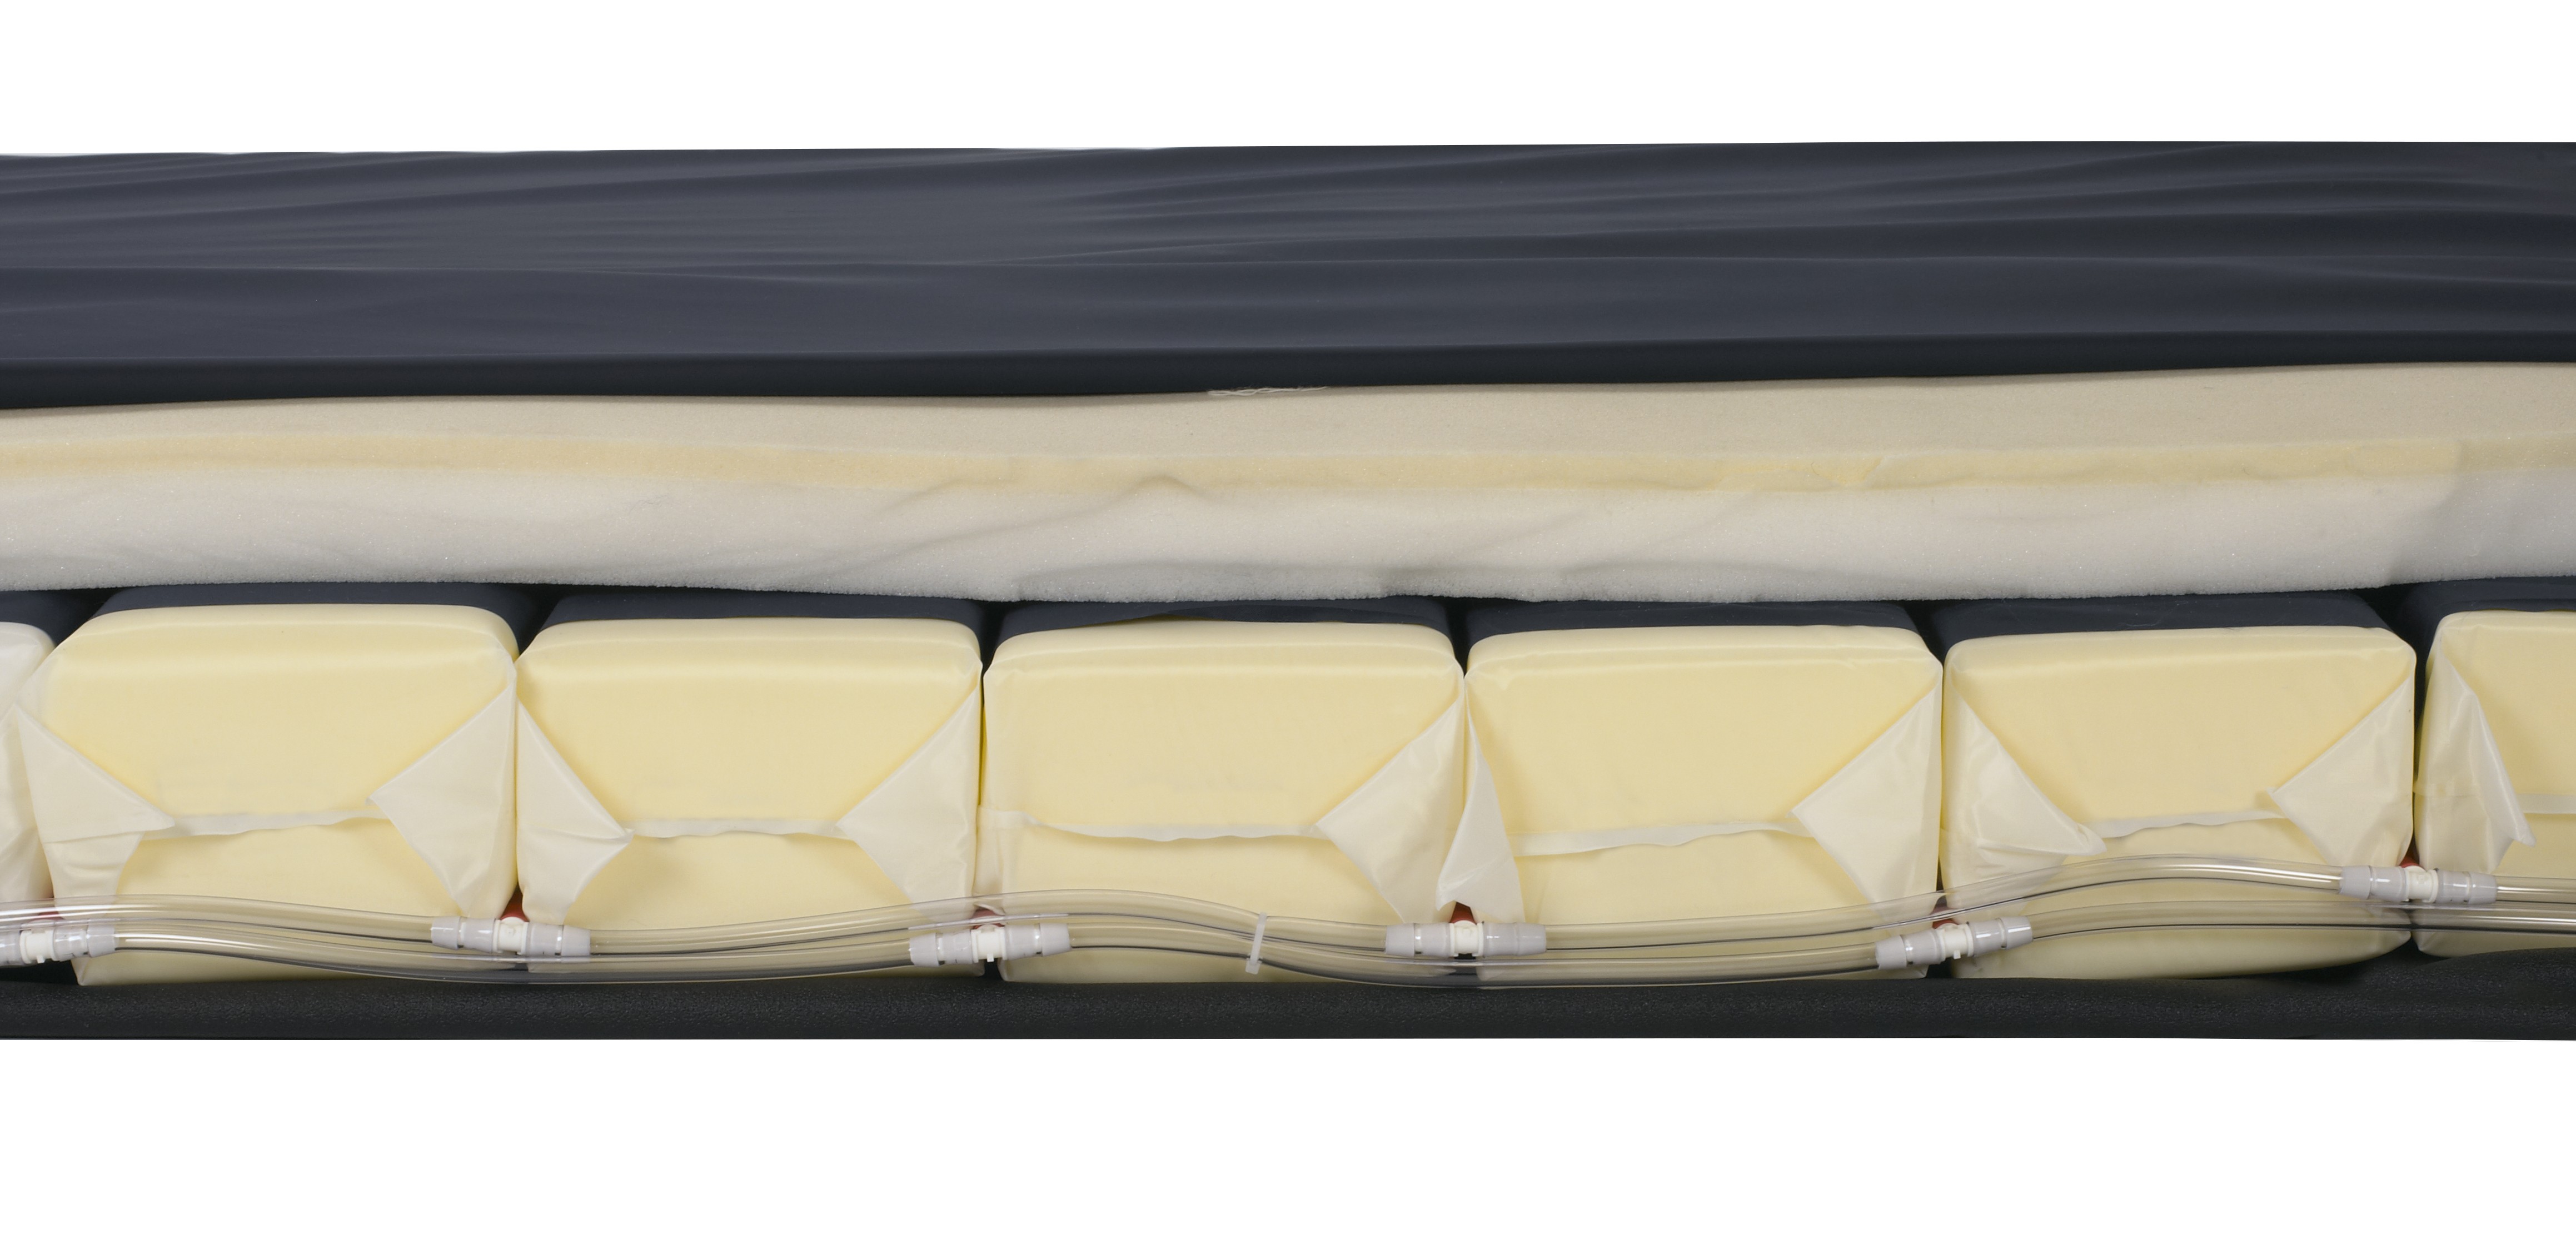 Mattresses  7" Latex 9" High Profile 11" THE ULTIMATE Pocketed Coil  Perfect Firmness  Memory Foam Drive Medical Span America Ultra Max Blue Chip Medical Prevention